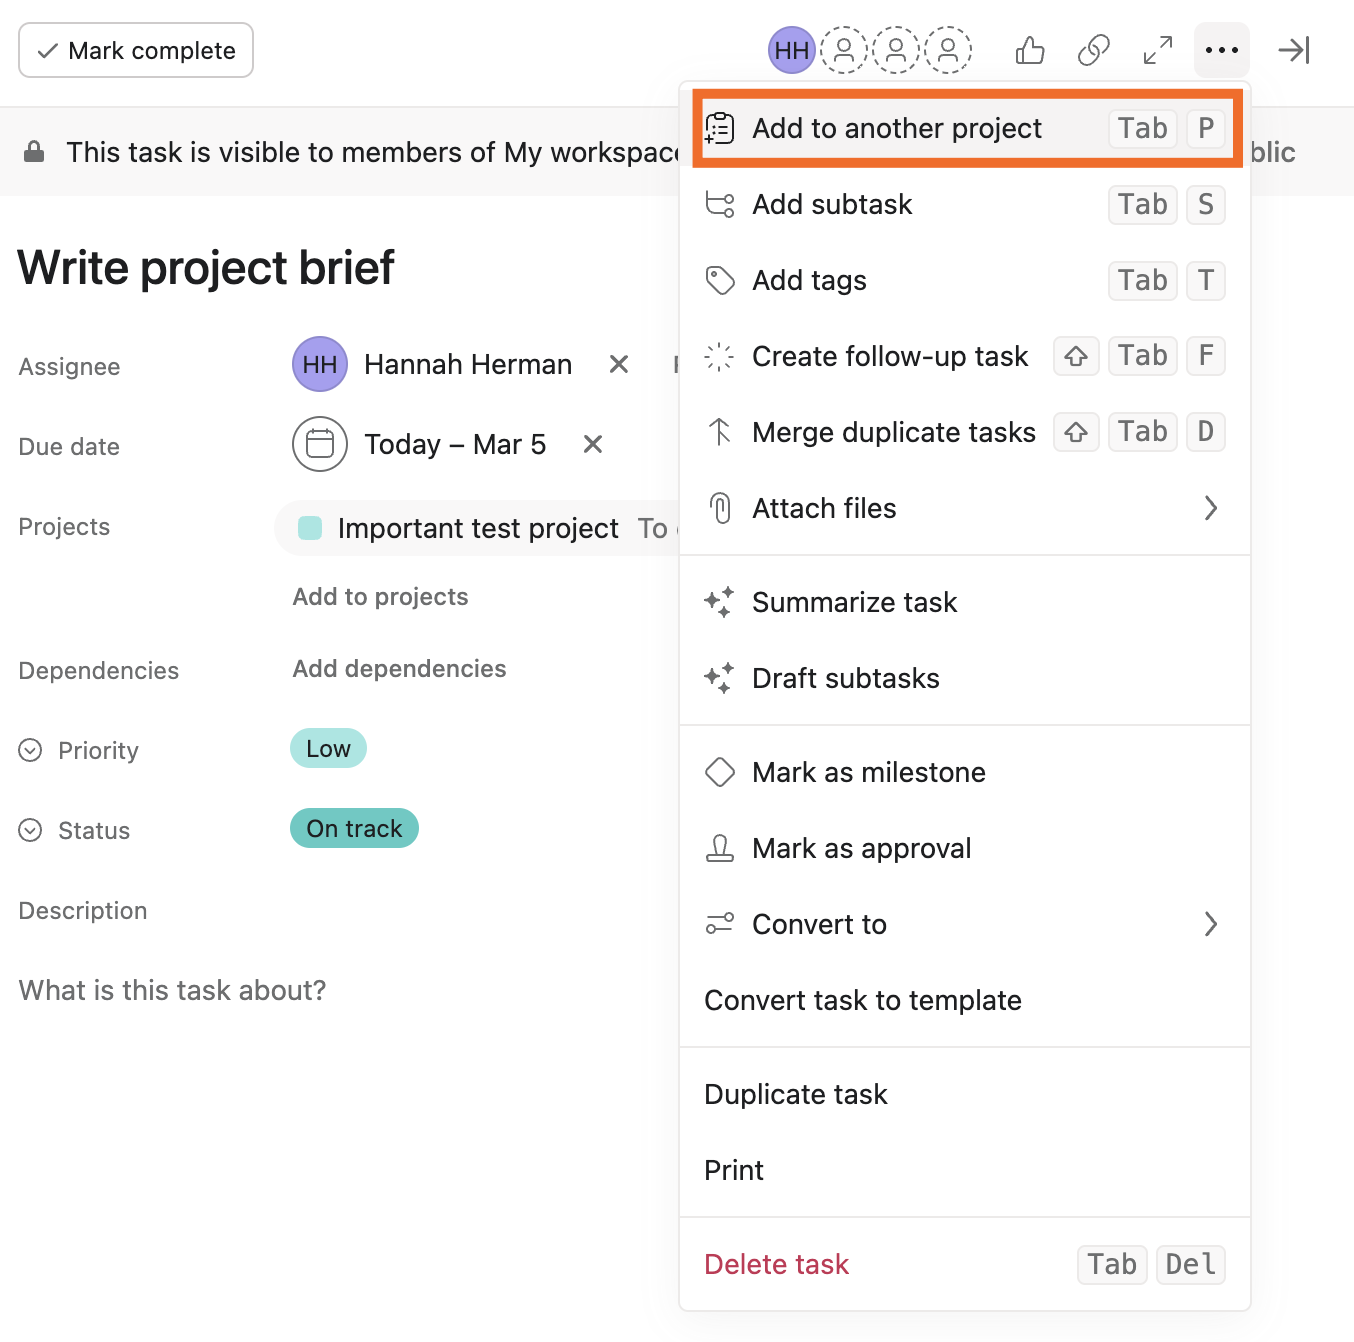 Adding task to another project in Asana